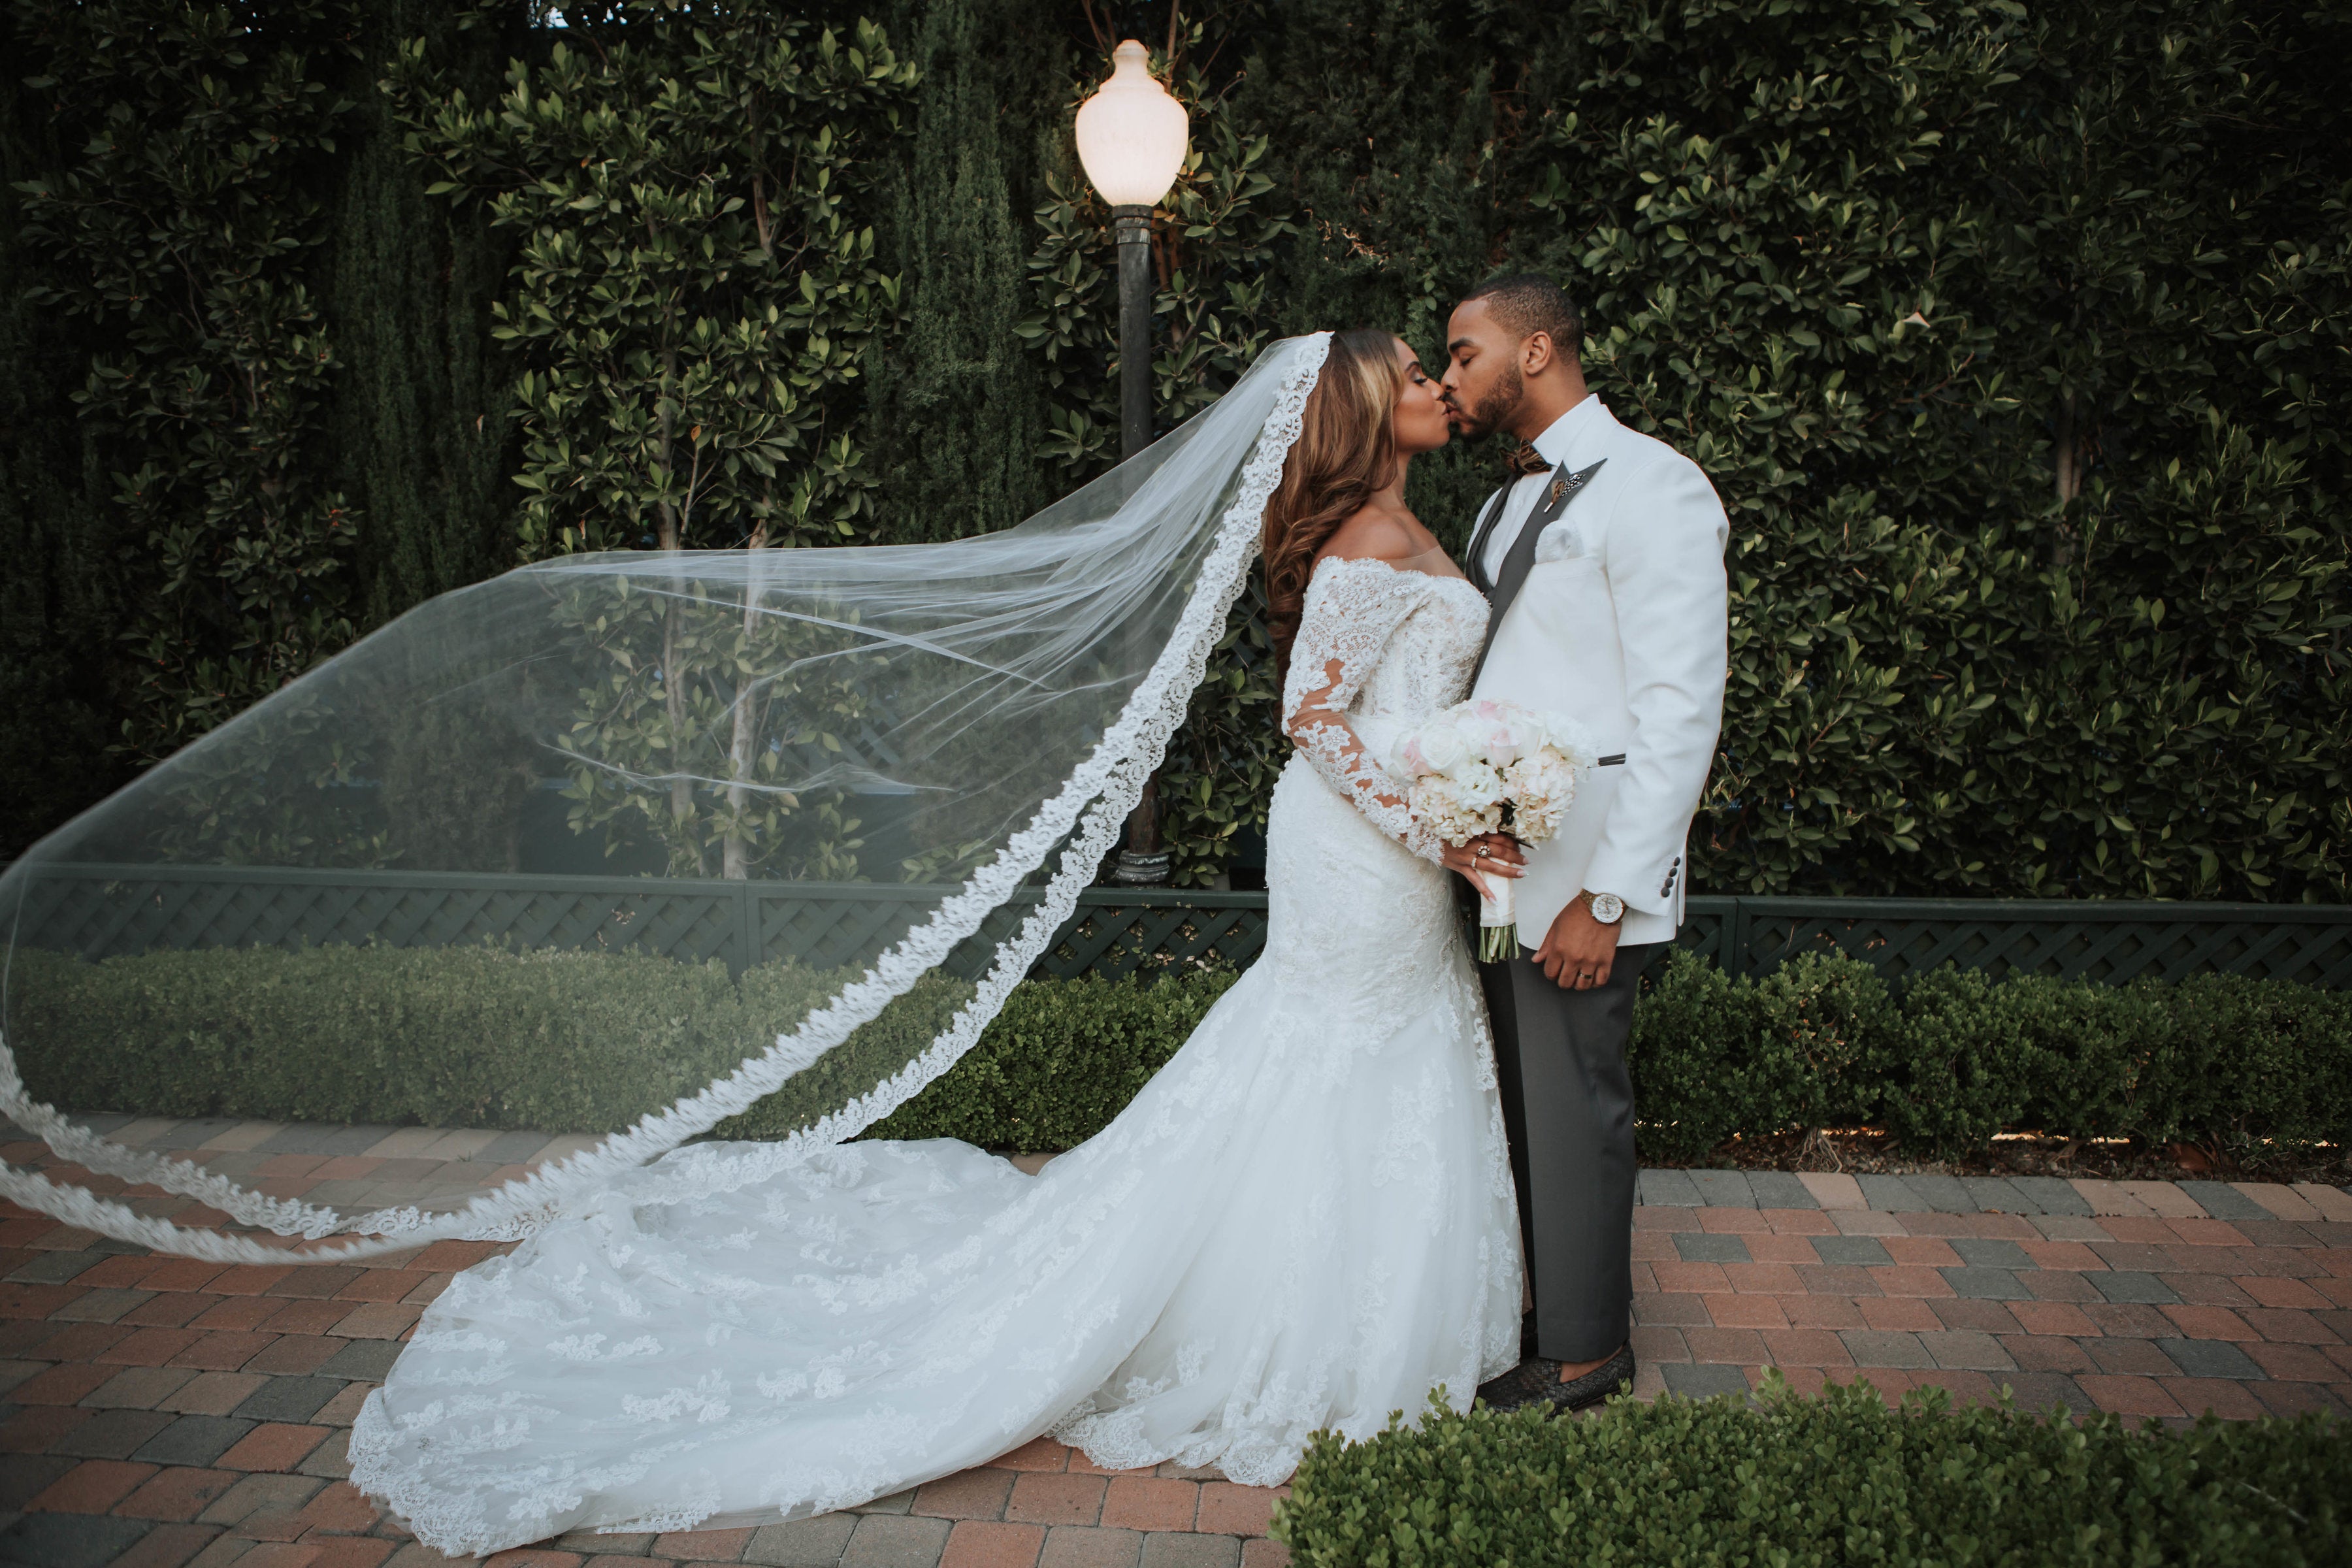 Bridal Bliss: We're Smitten With College Sweethearts Mikáel and Angel's Sweet Love Story
